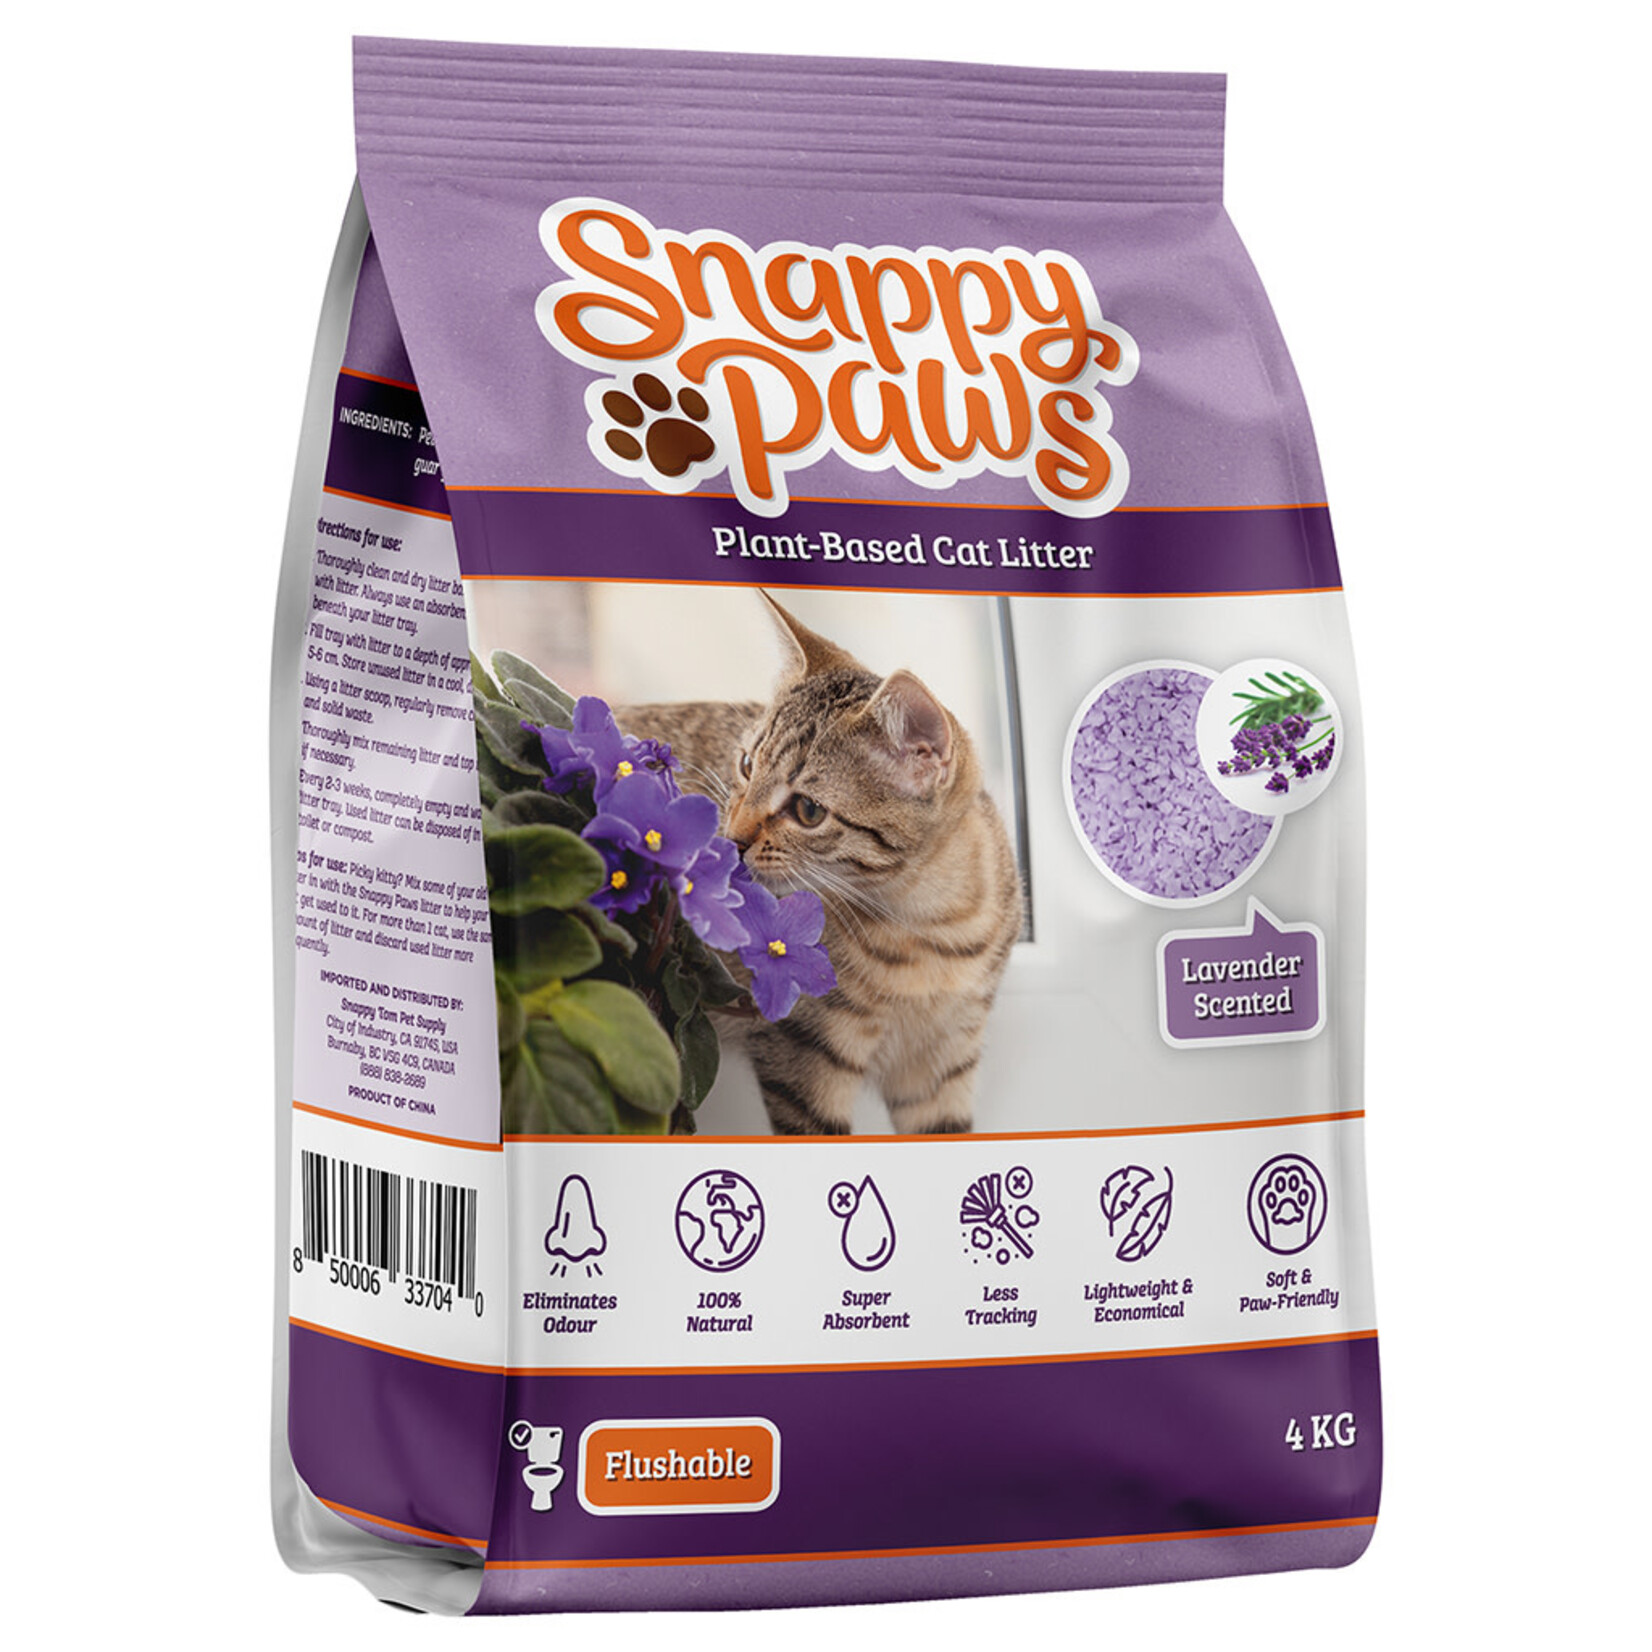 Snappy Tom Snappy Paws Lavender Scent 8.8LB